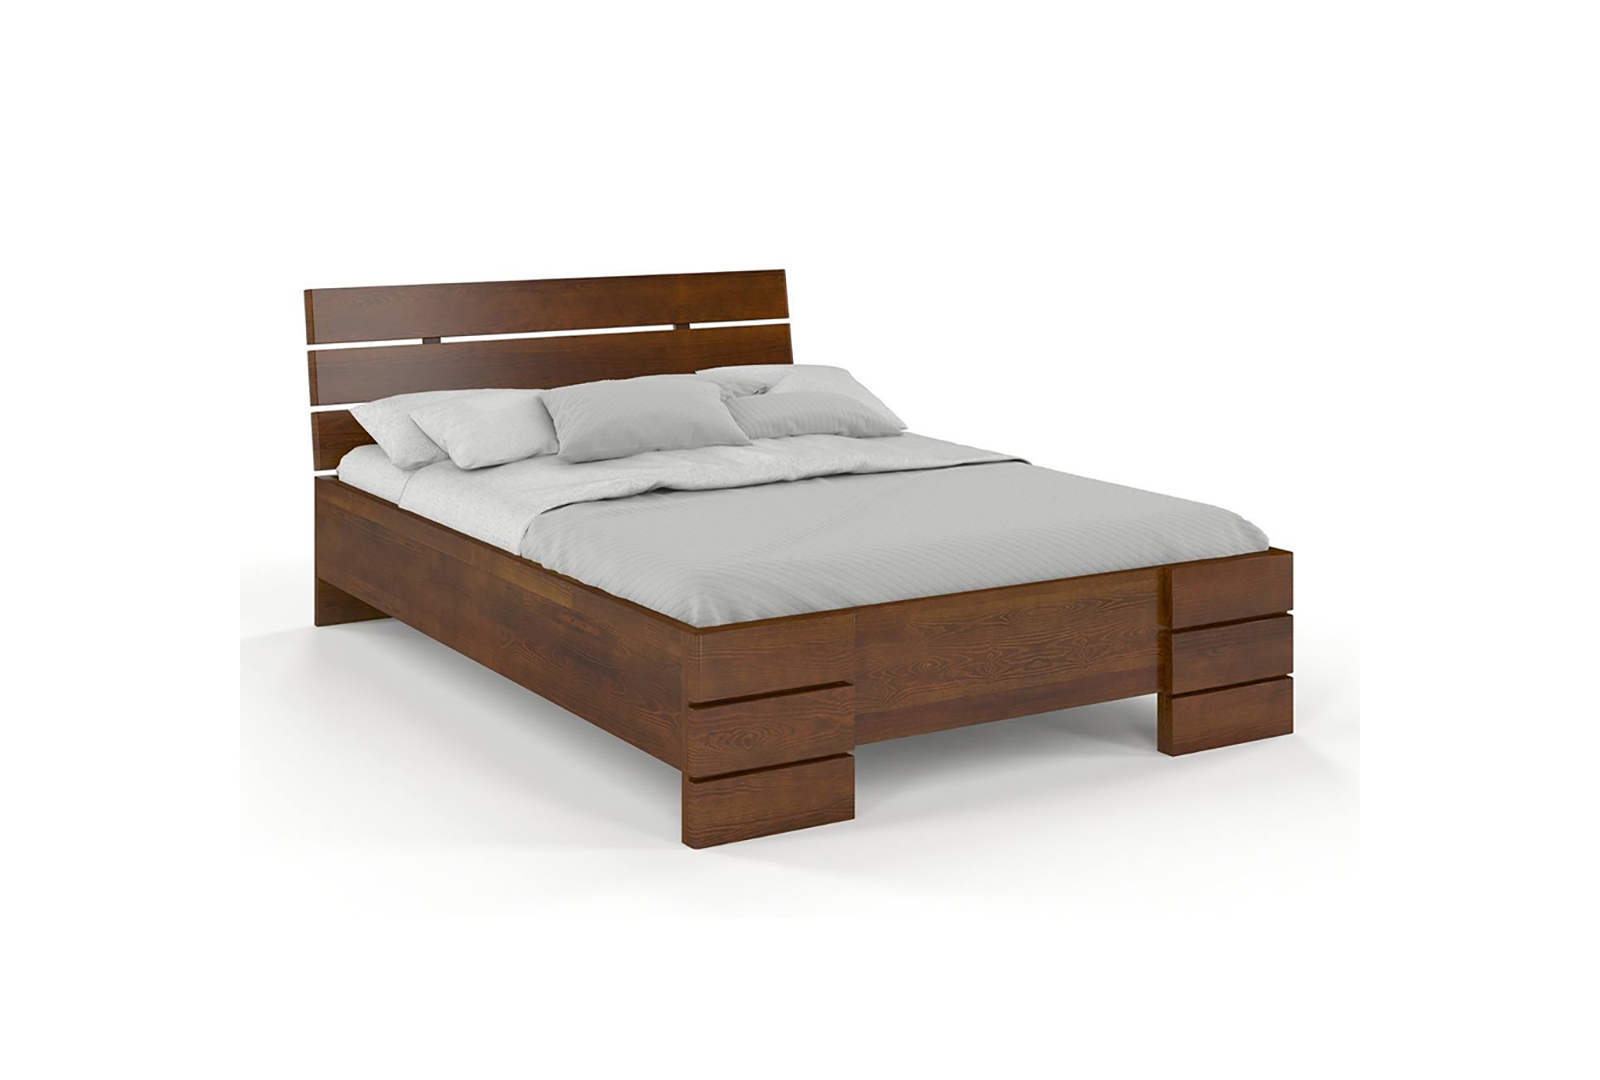 VISBY SANDEMO HIGH AND LONG PINE BED